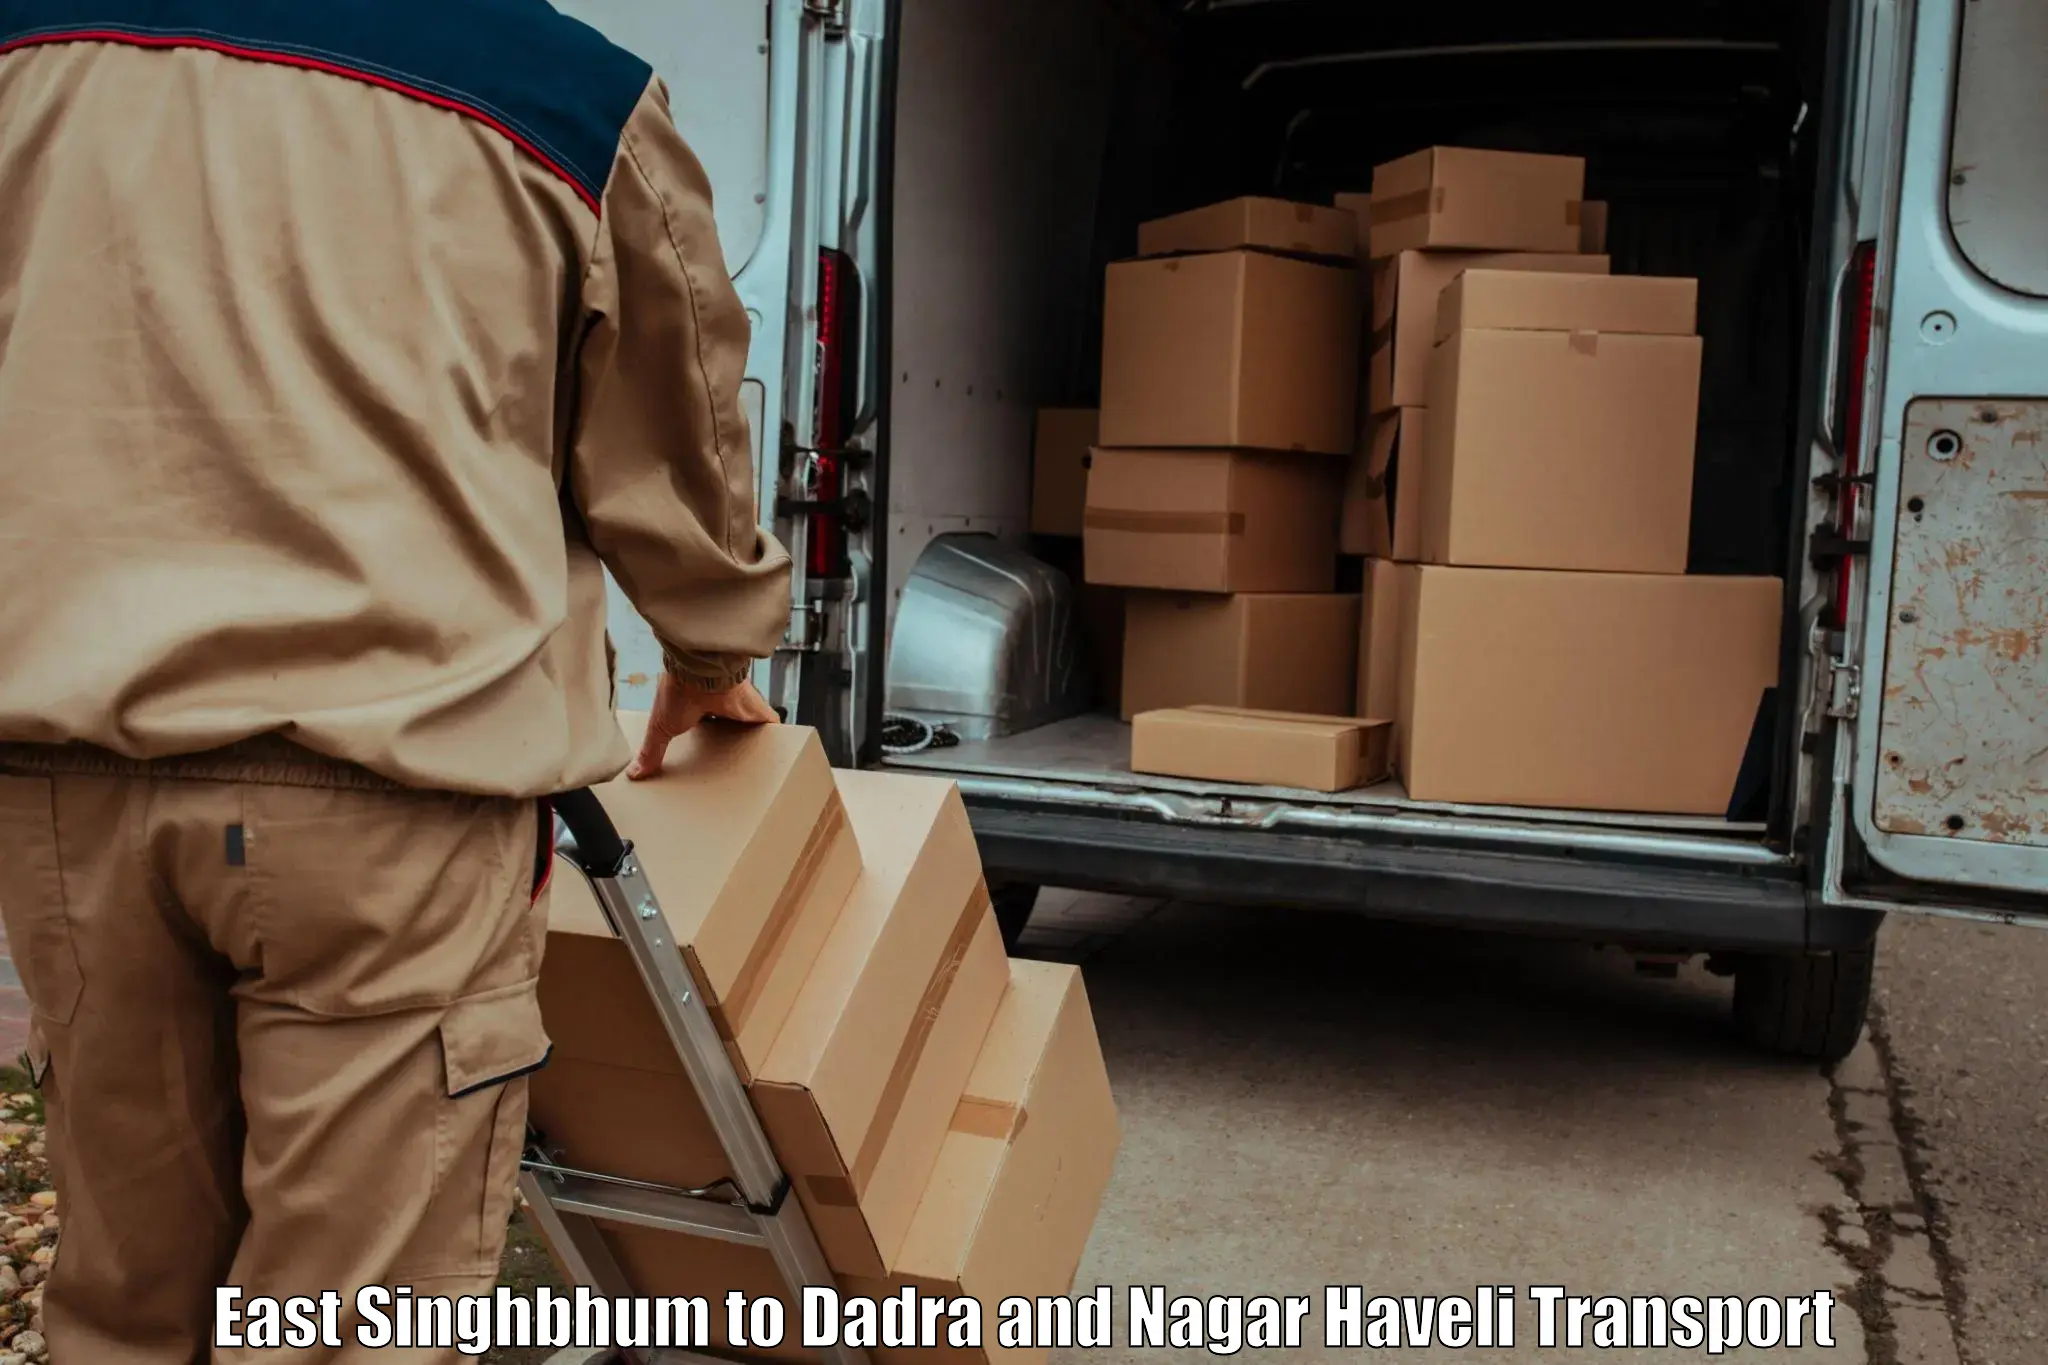 Lorry transport service in East Singhbhum to Dadra and Nagar Haveli